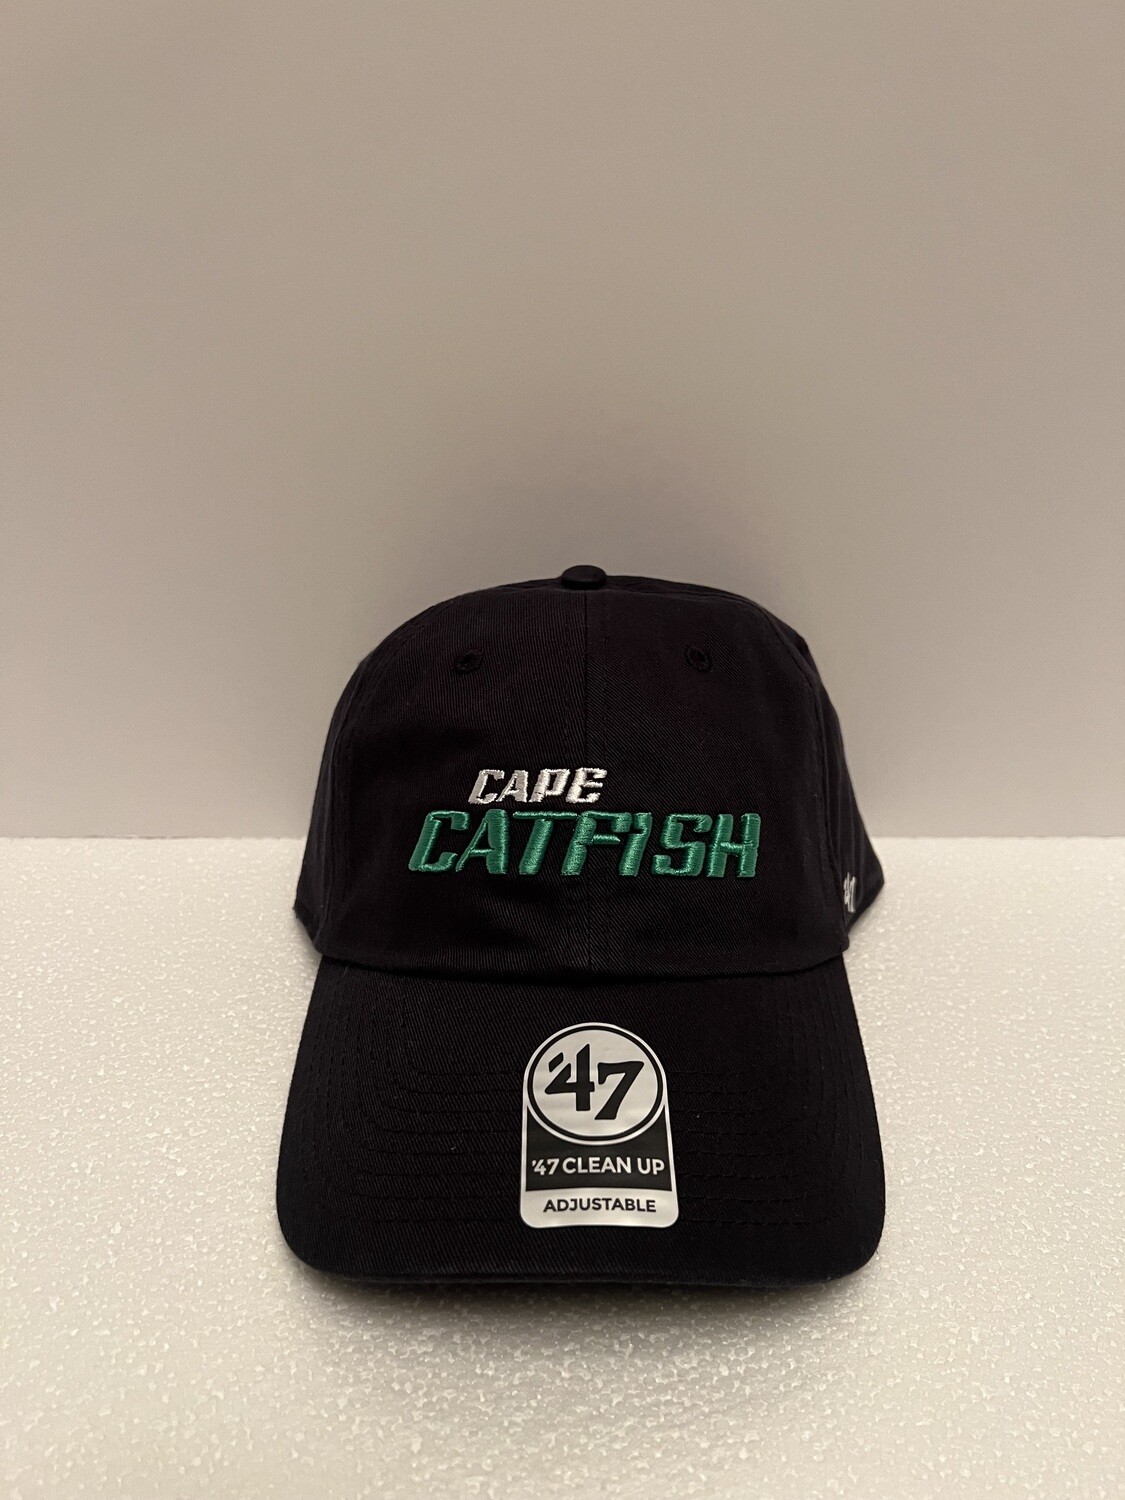 47' Clean Up Navy hat w/ KELLY GREEN Catfish Word Mark